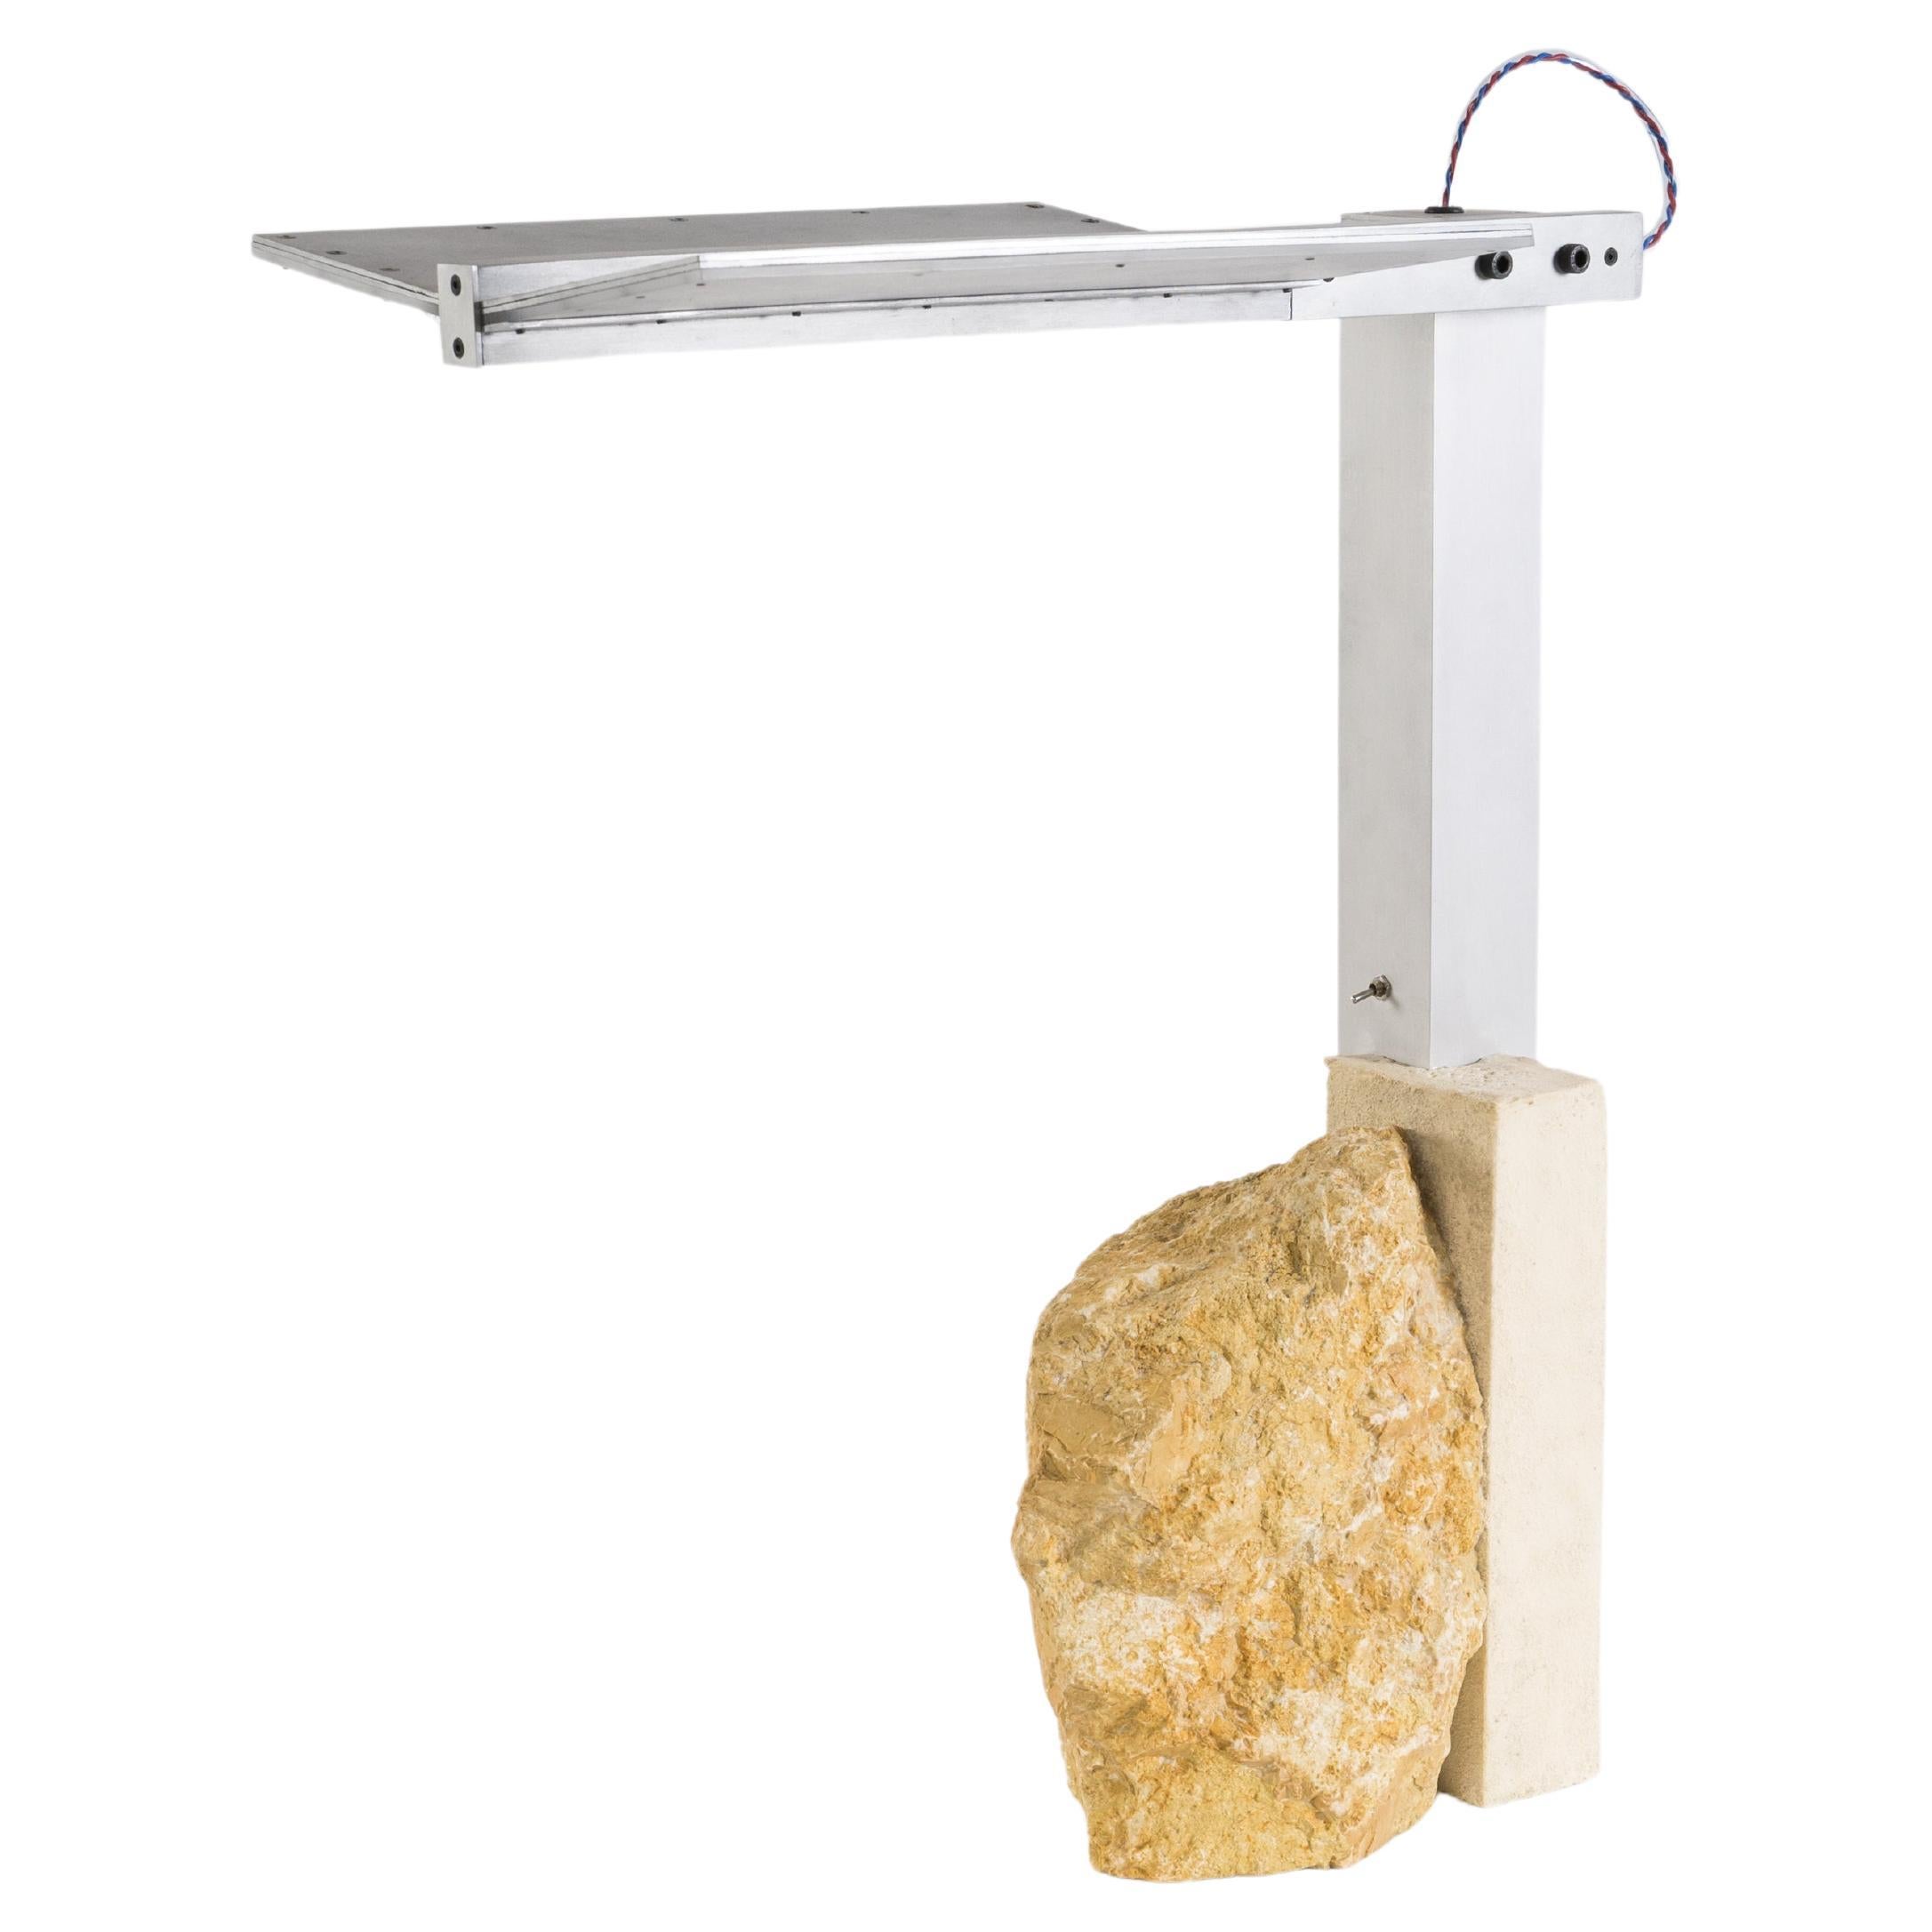 Table Lamp, Foreign Bodies - ARKMDS-1, aluminium, rock – By Collin Velkoff